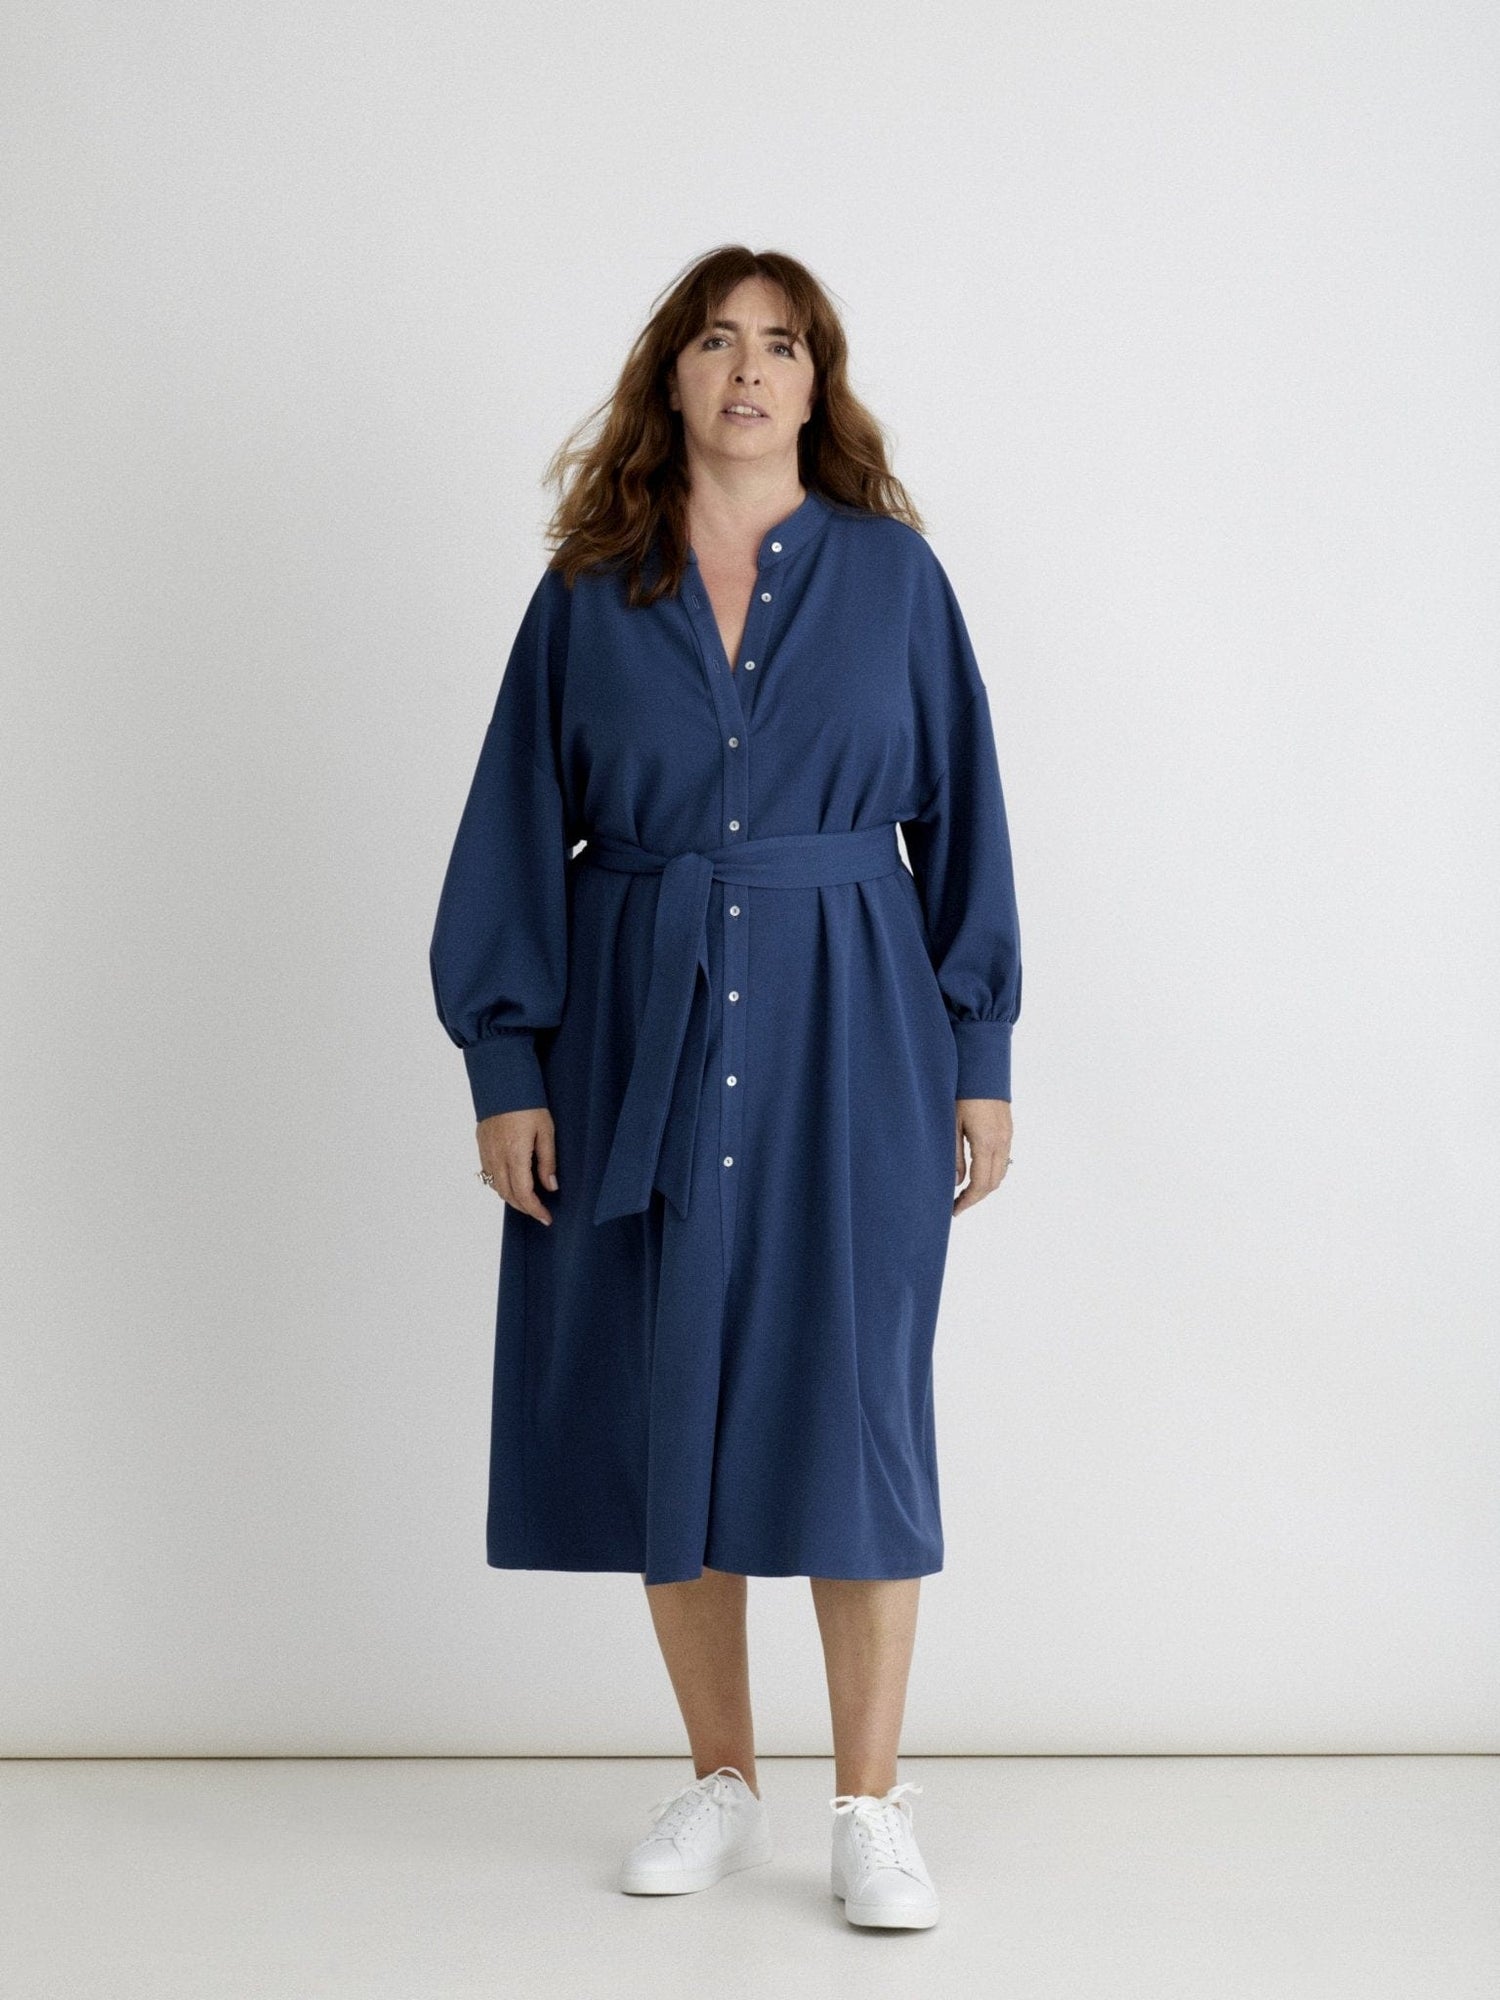 Les Militantes - Méganne large size blue dress chic, trendy and quality made in France